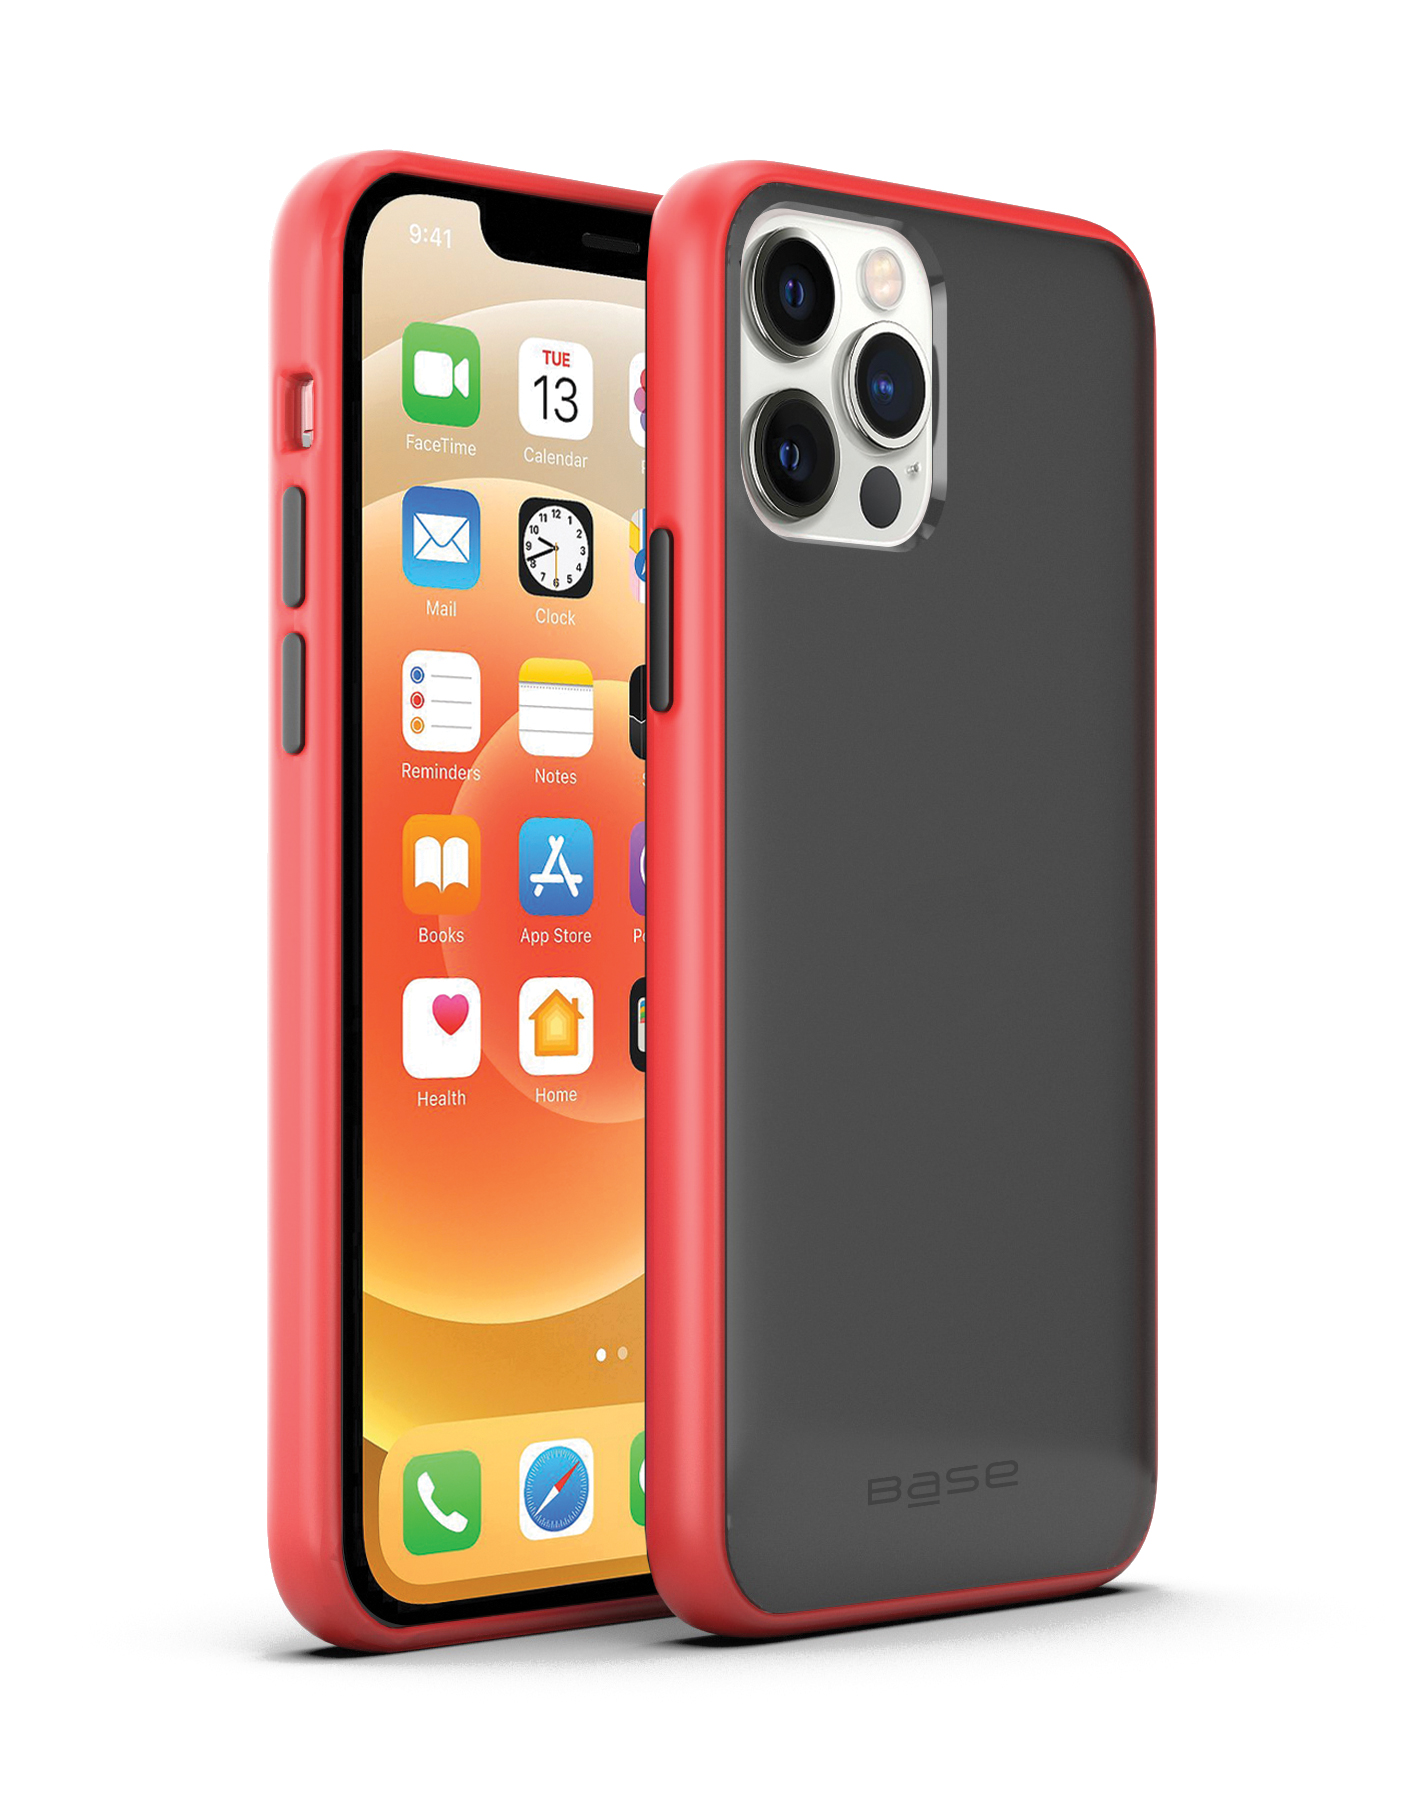 Clear/black slim protective case with red edges for iPhone 12 / iPhone 12 Pro cell phones